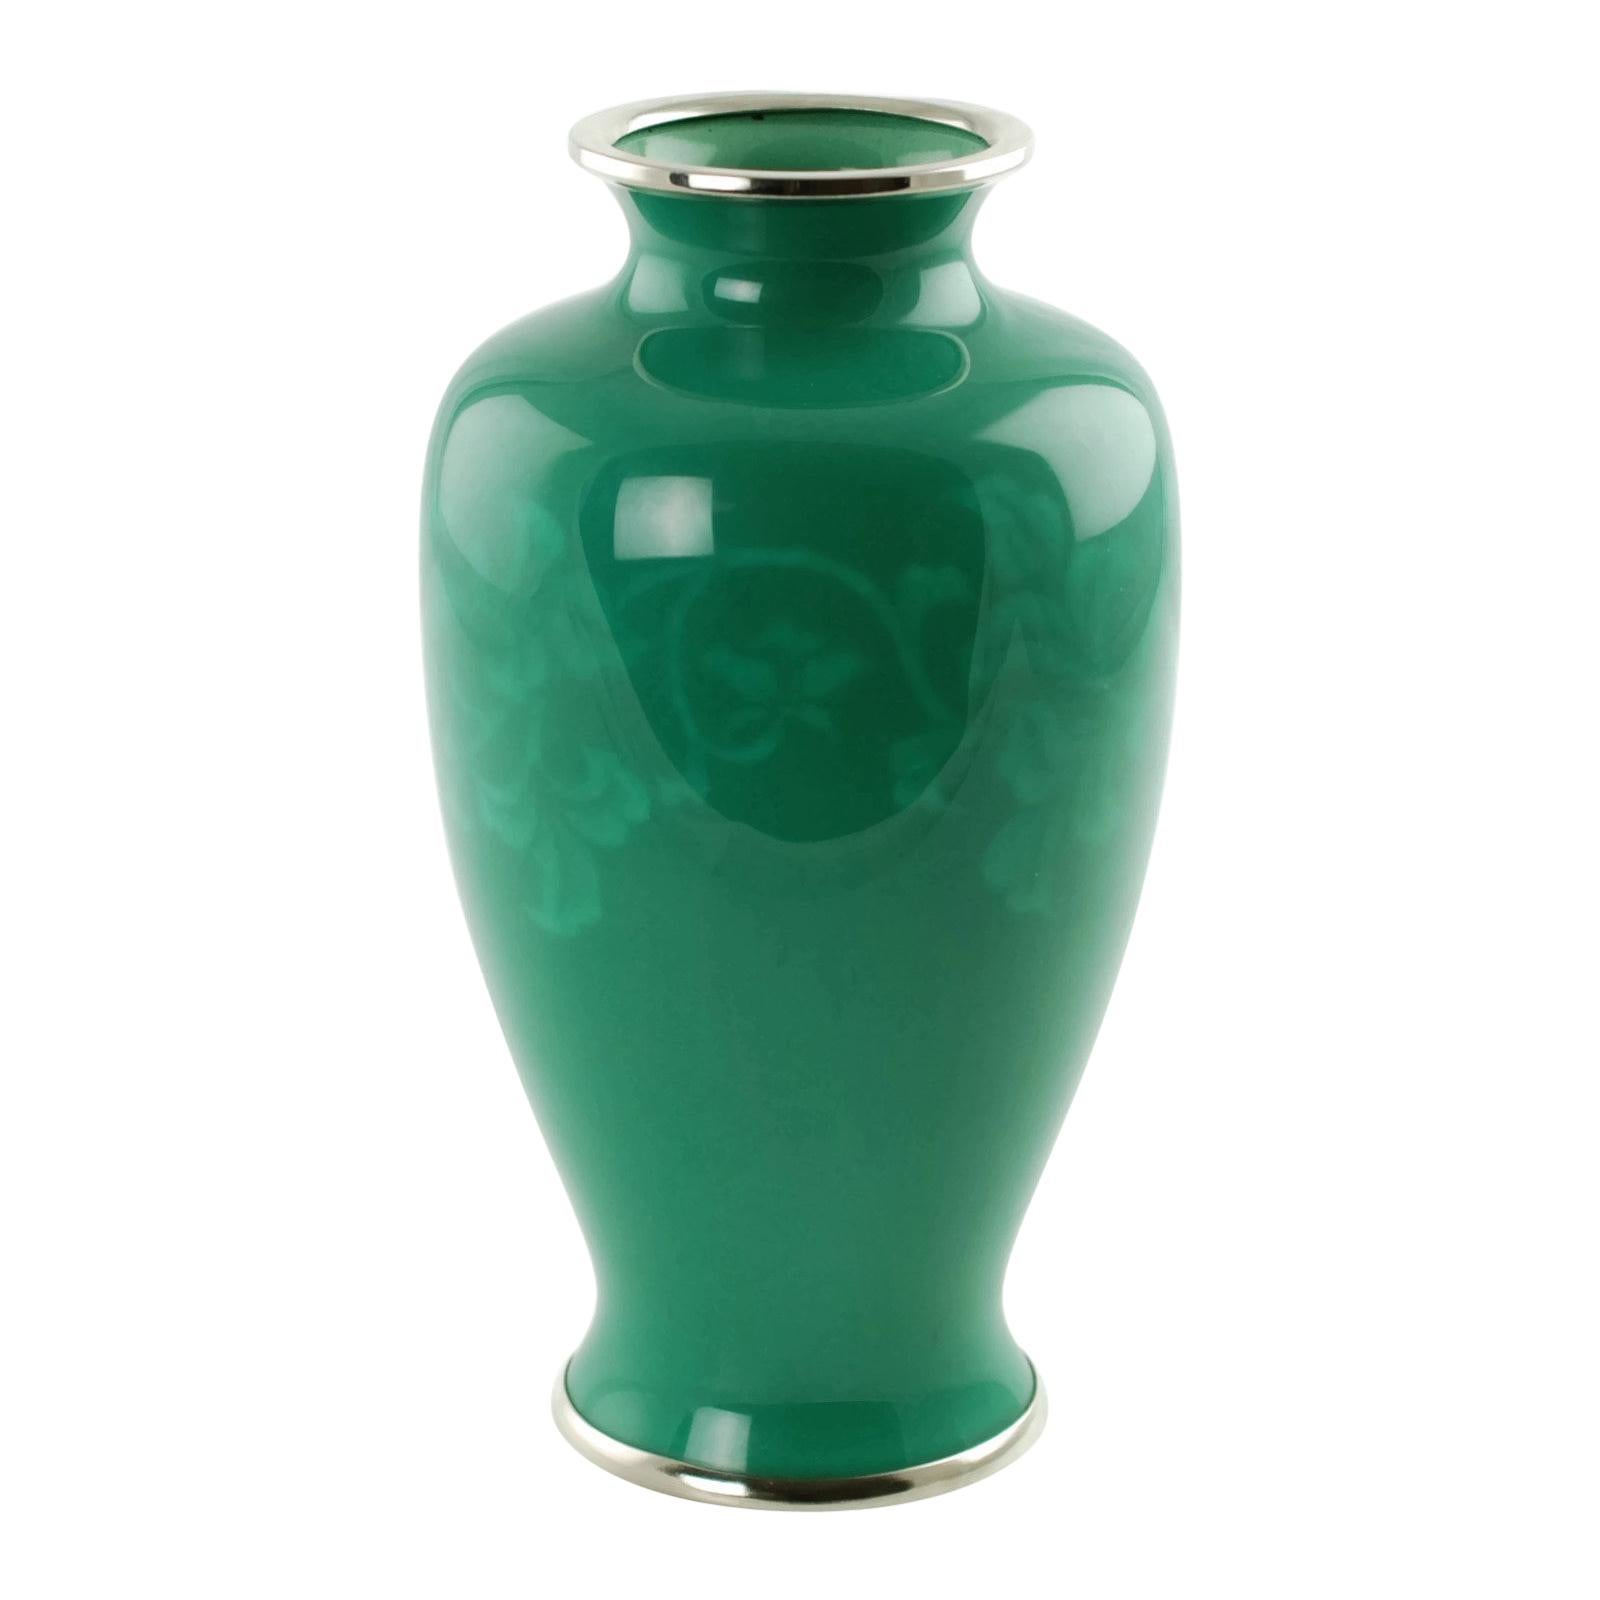 Signed Japanese Ando Jade Green Wireless Cloisonné Vase